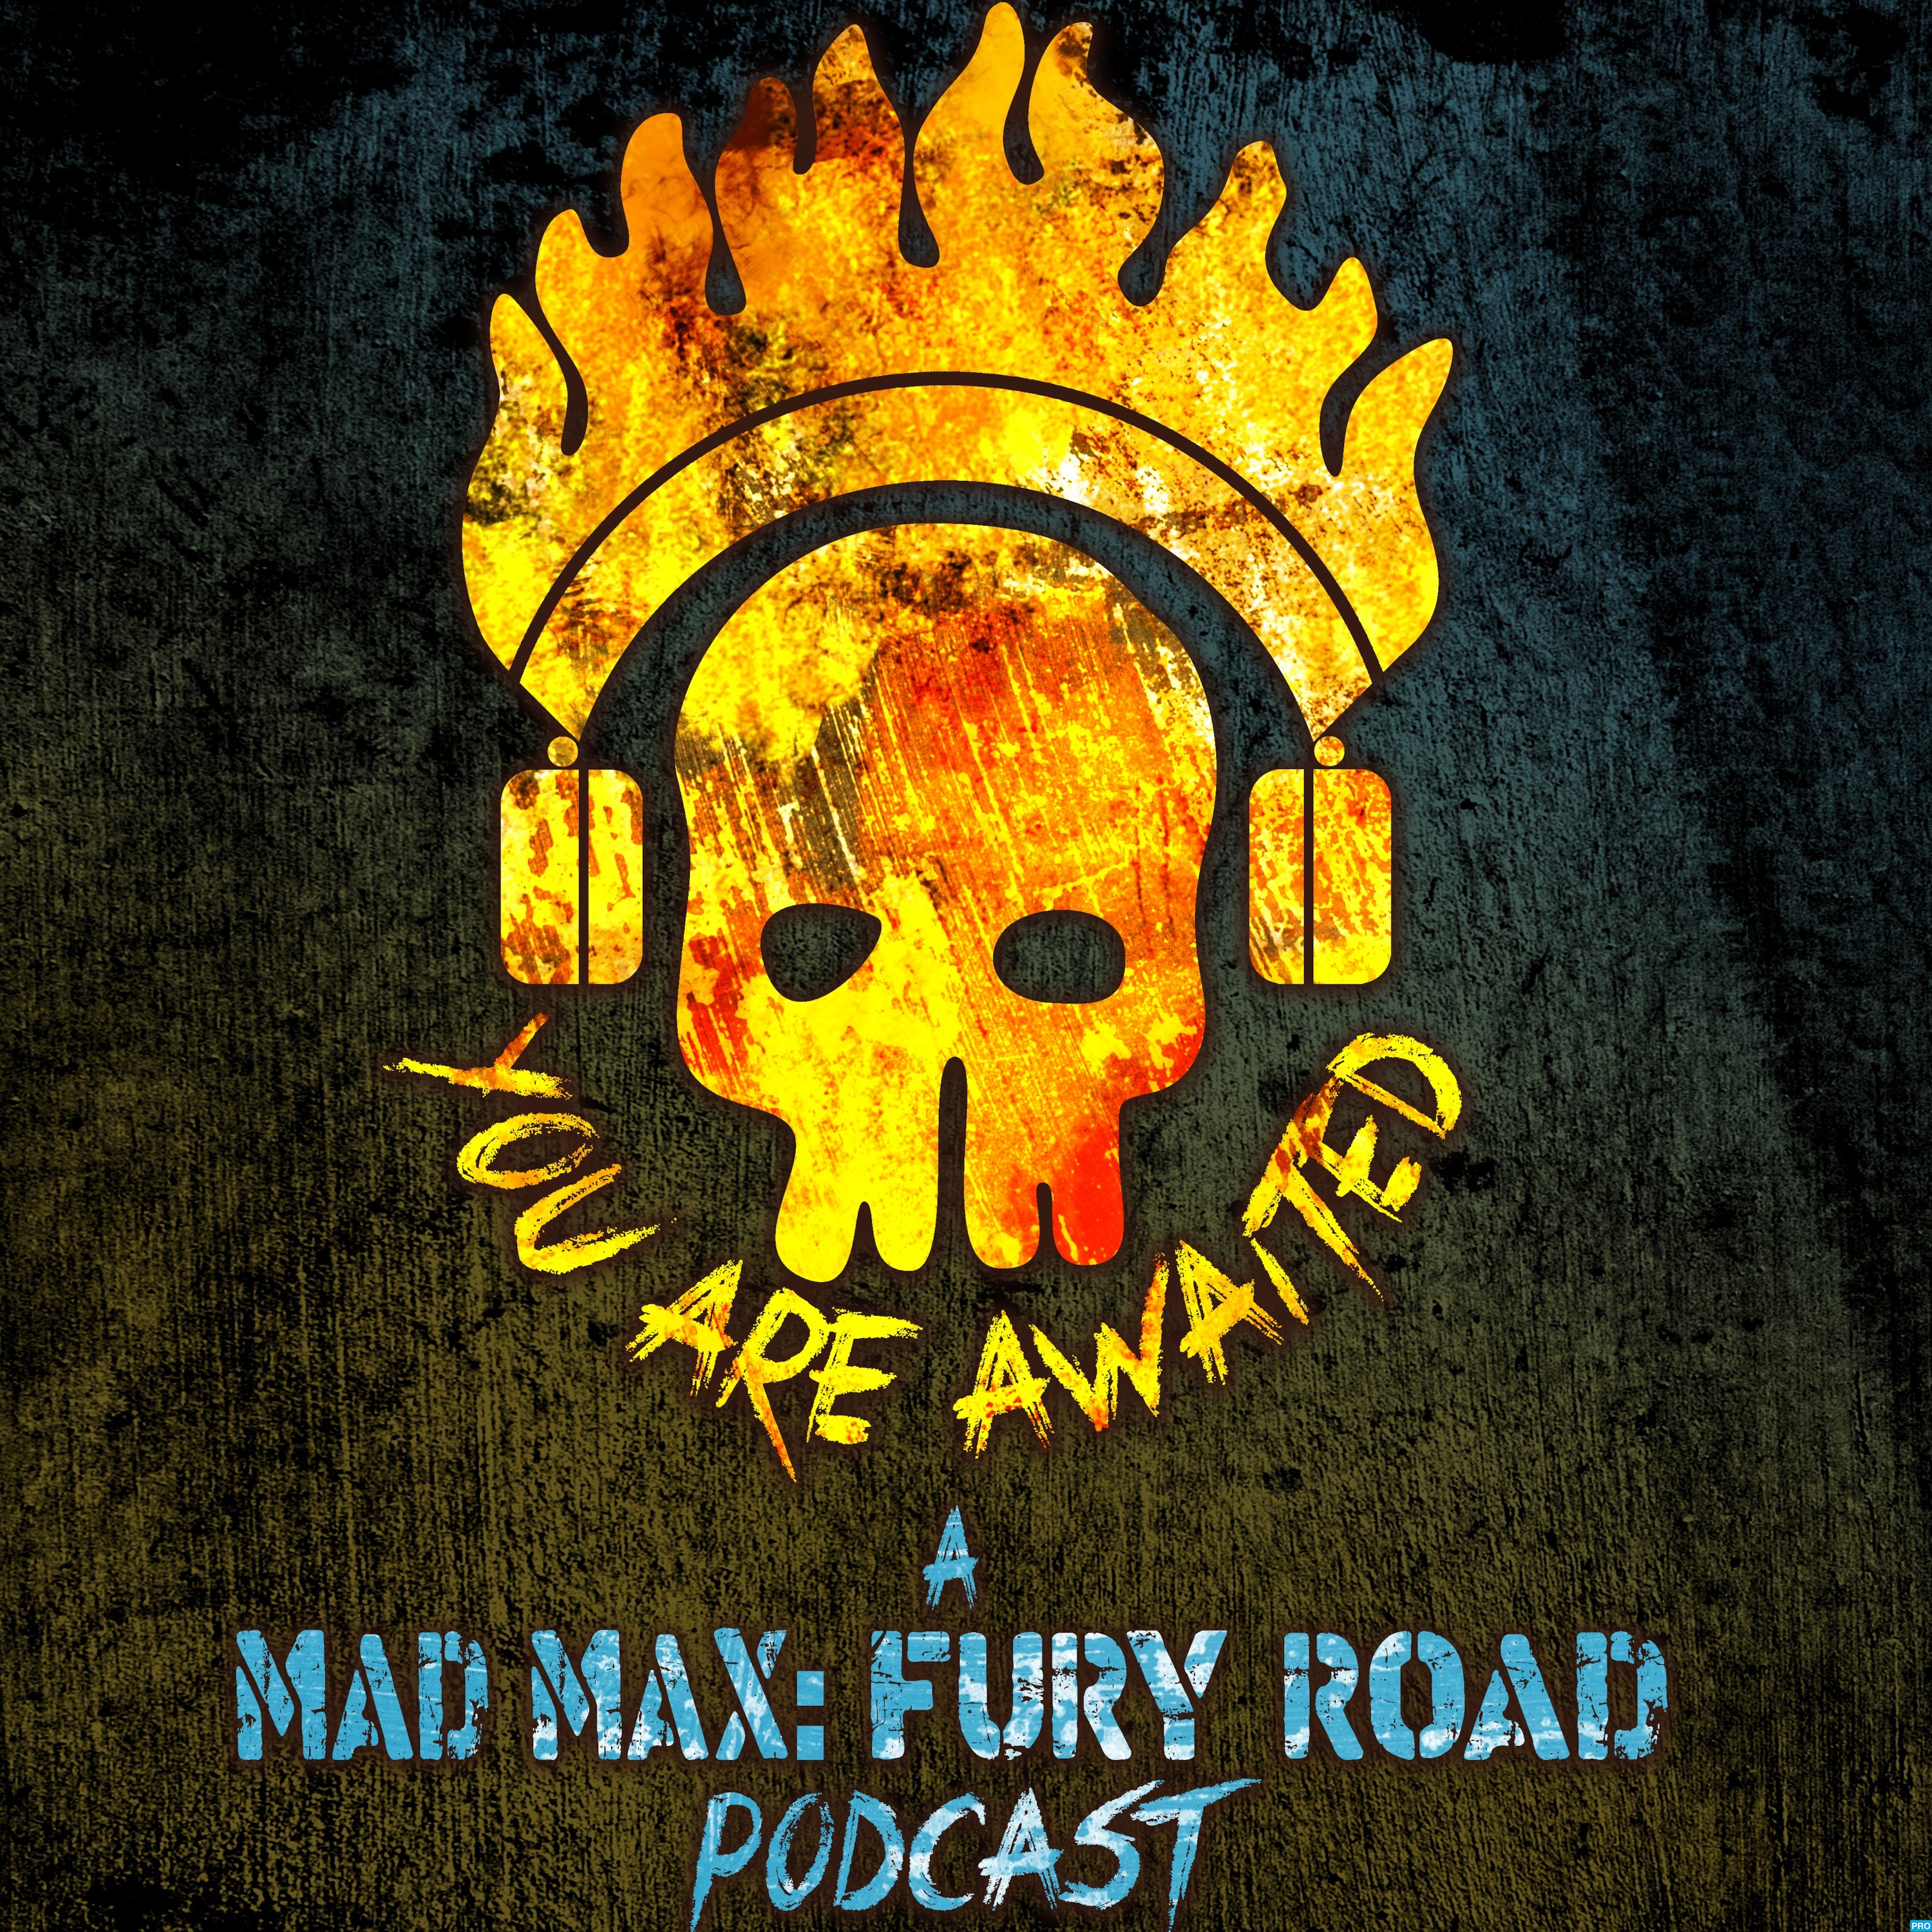 You Are Awaited: A MAD MAX FURY ROAD podcast